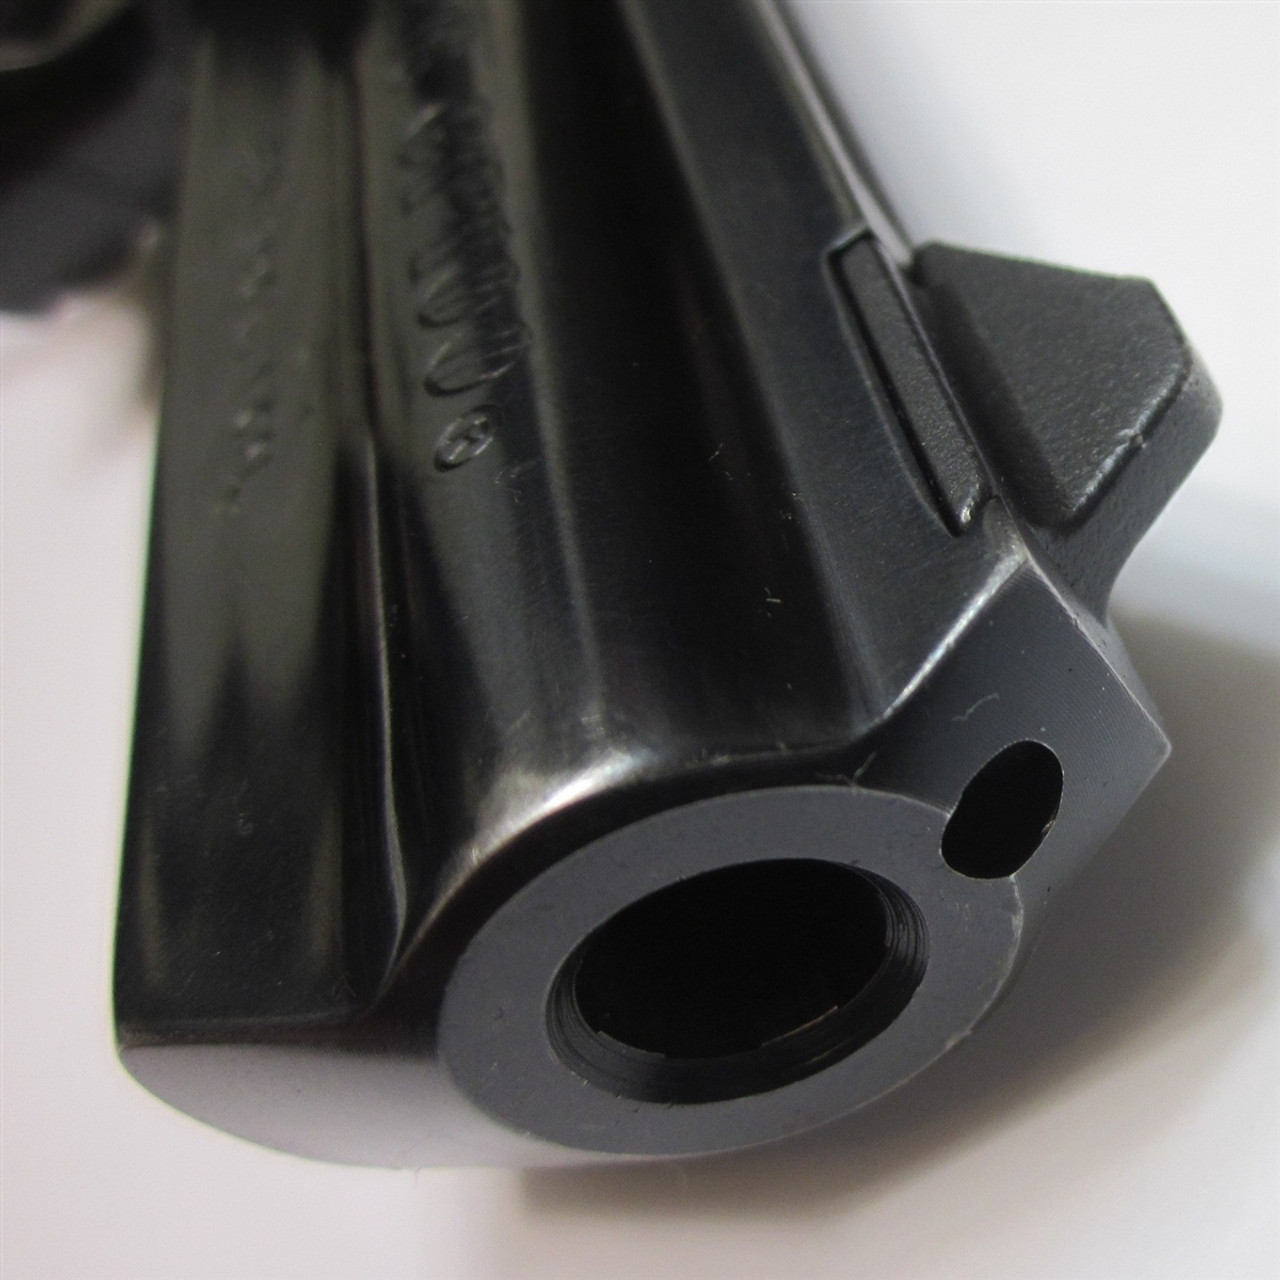 Factory Ruger front sight Plunger/Latch for GP100 and Super Redhawk (and more) Revolvers